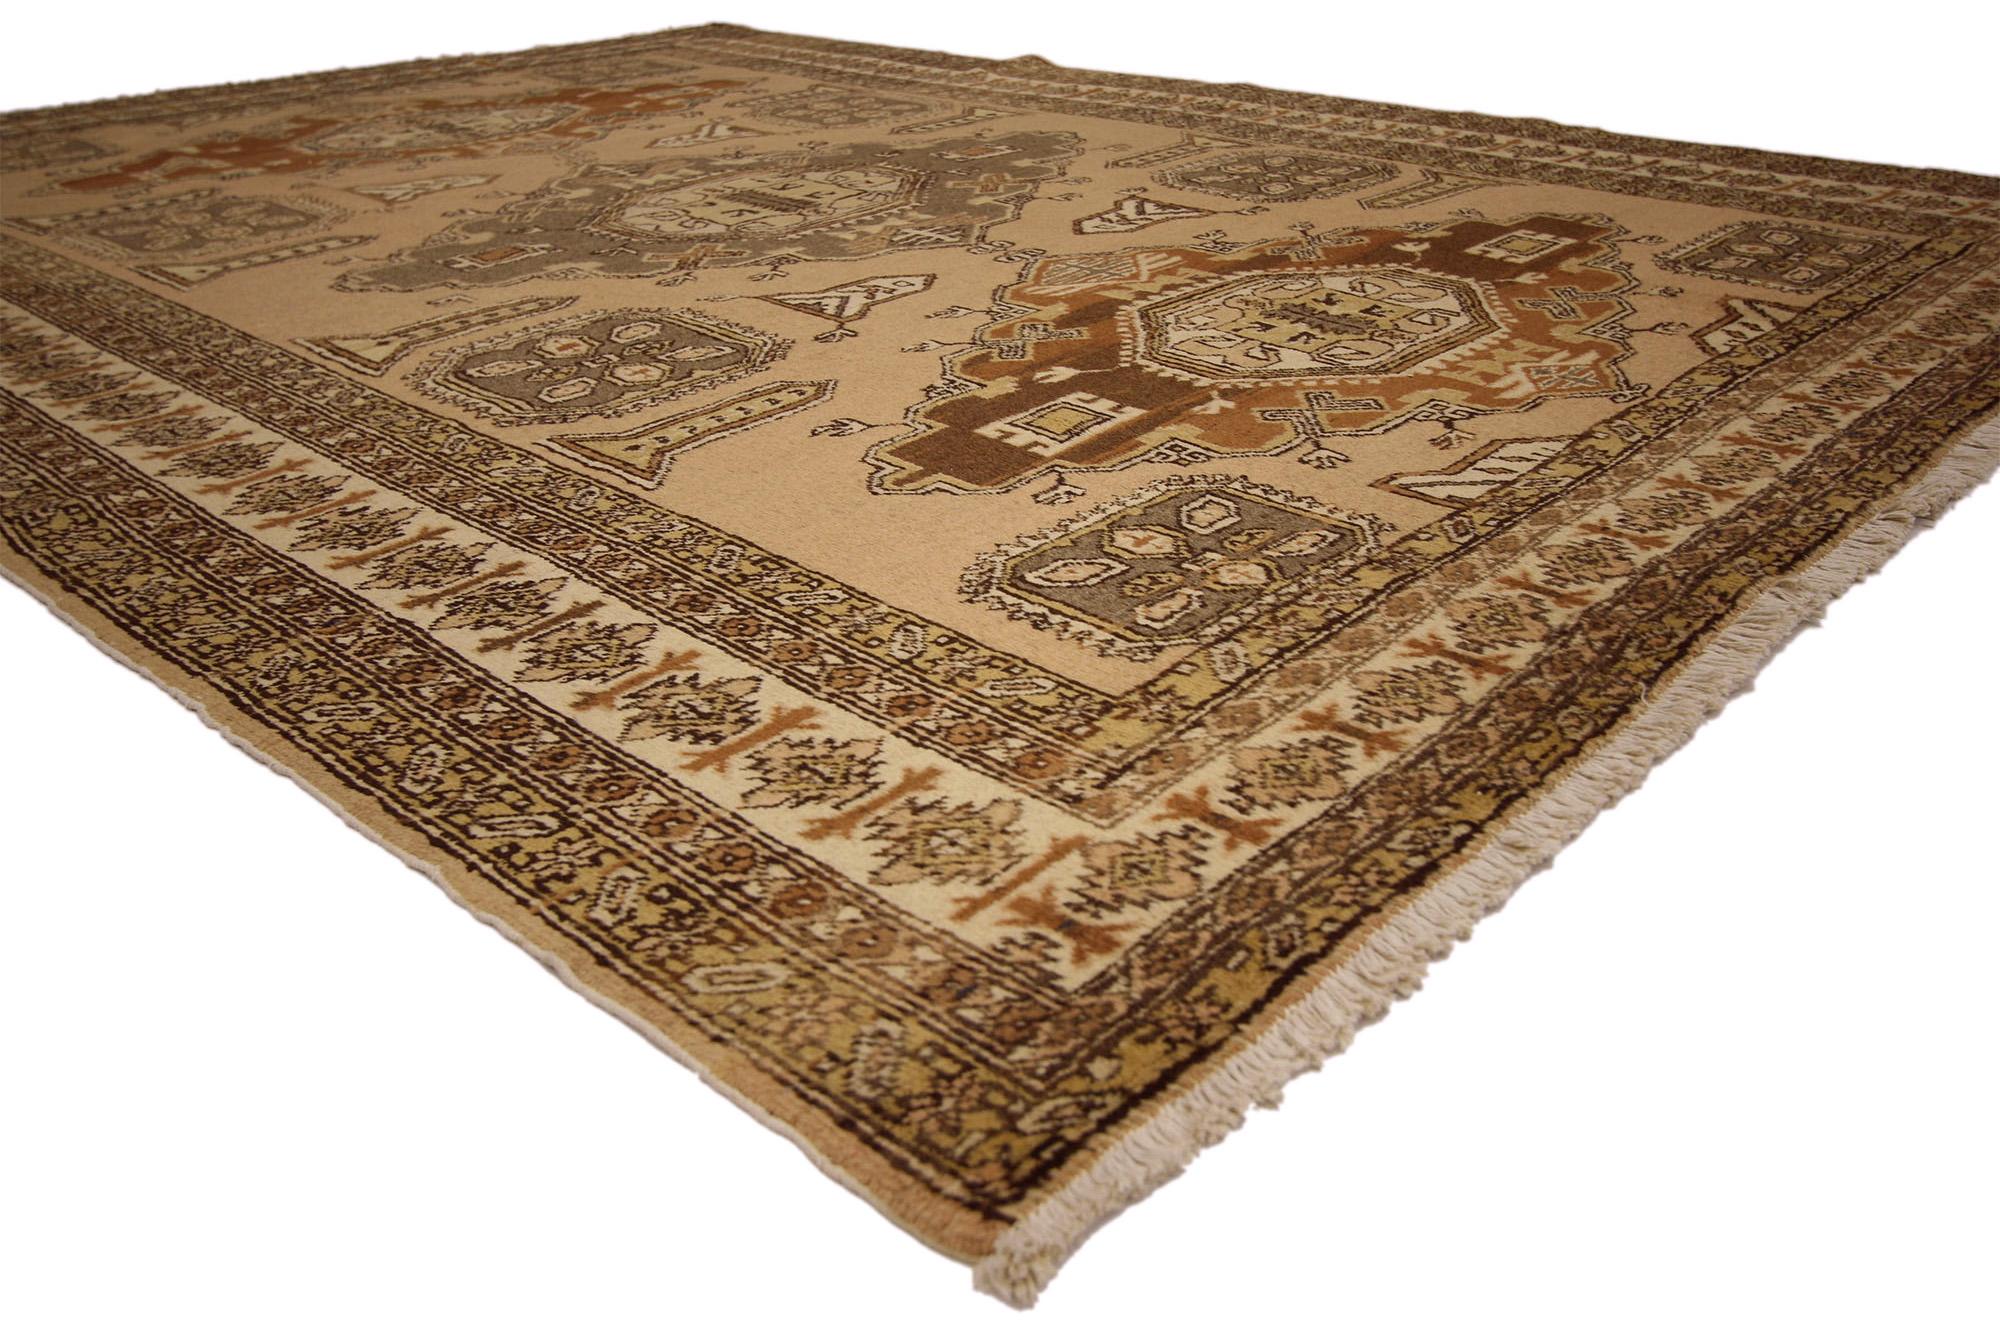 72037 Vintage Brown Persian Ardabil Rug, 07'00 x 10'00. Antique-washed Persian Ardabil rugs, originating from the city of Ardabil in Iran, are modern rugs that have undergone a special washing process to soften the colors while still maintaining the